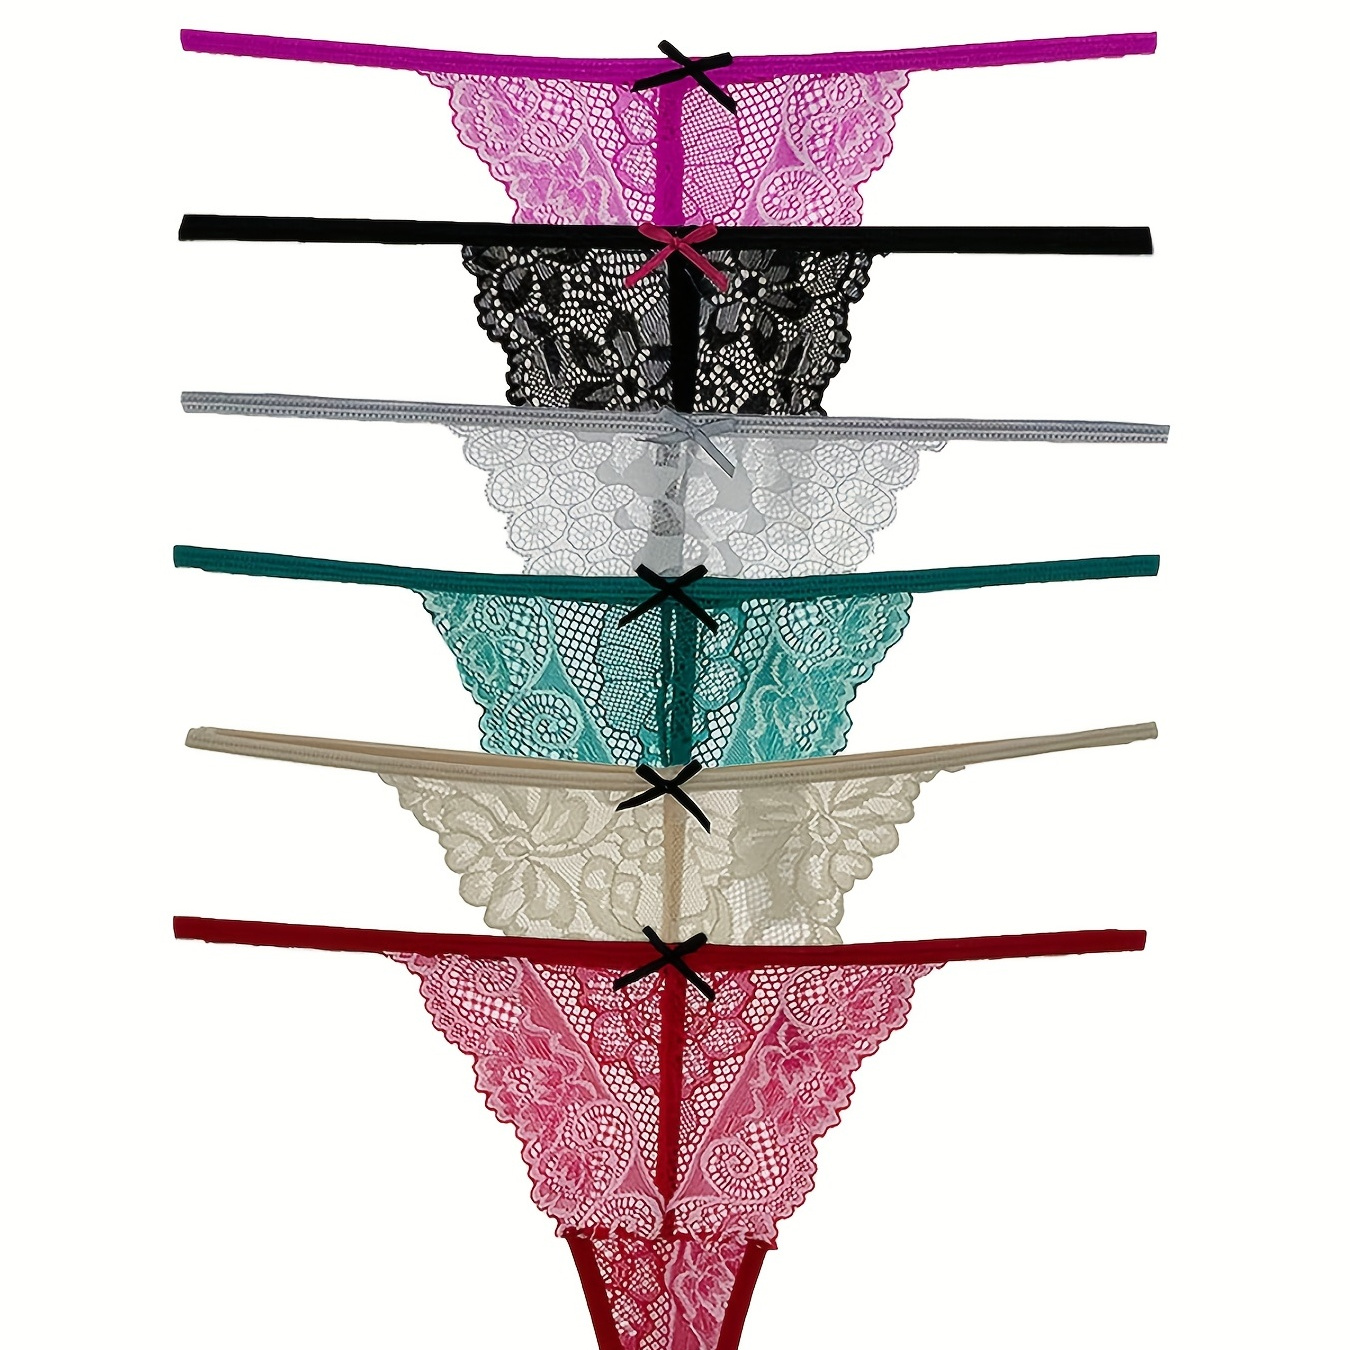 

6pcs Floral Lace G-string Panties, Sexy Breathable Mesh Intimates Panties, Women's Lingerie & Underwear